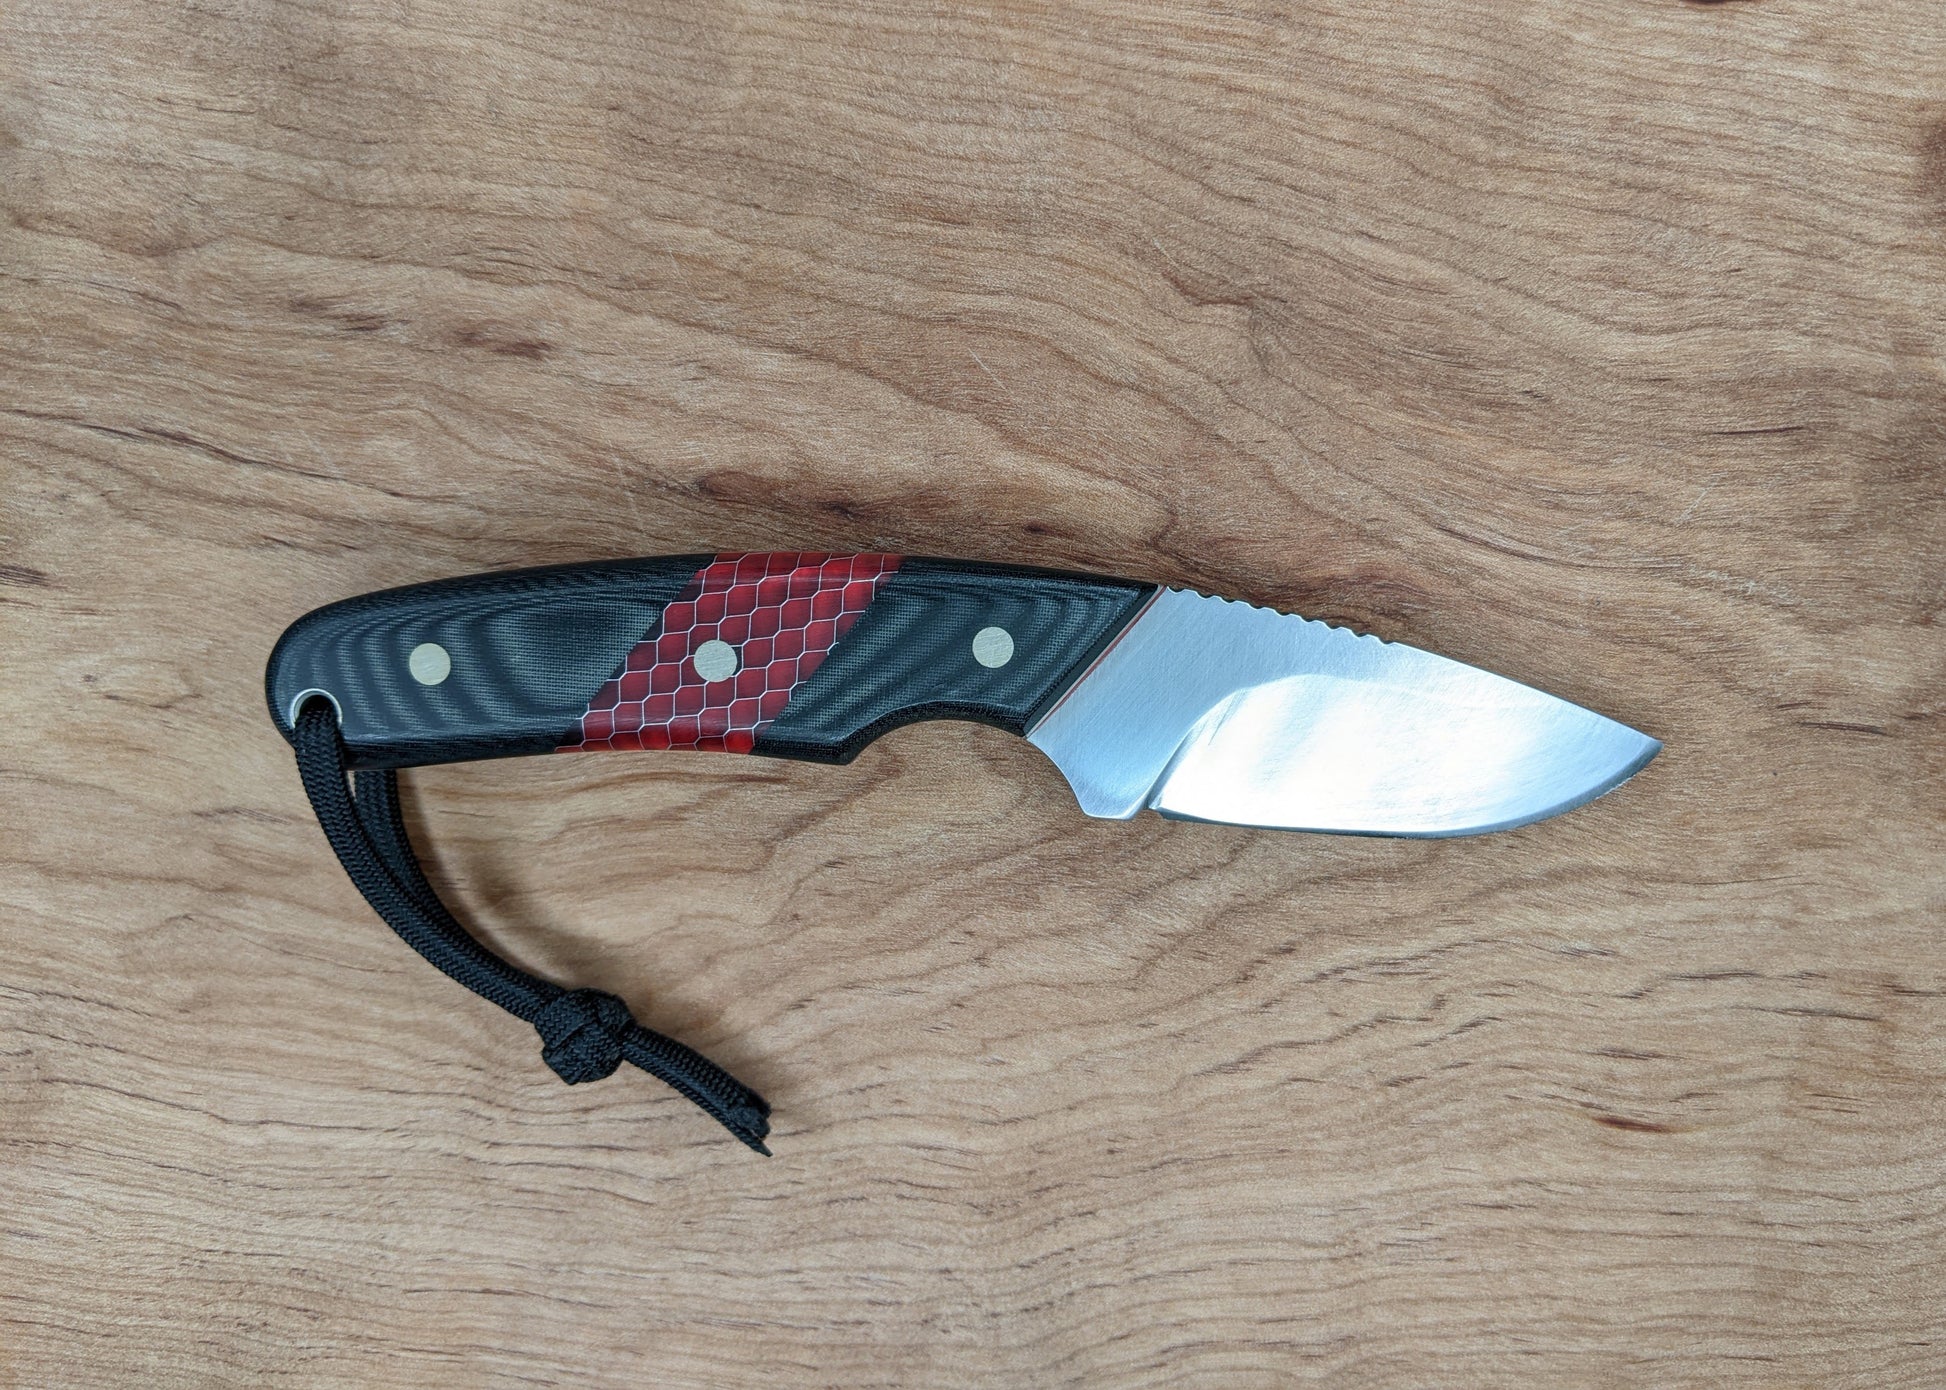 small knife with black and red handle on wooden background